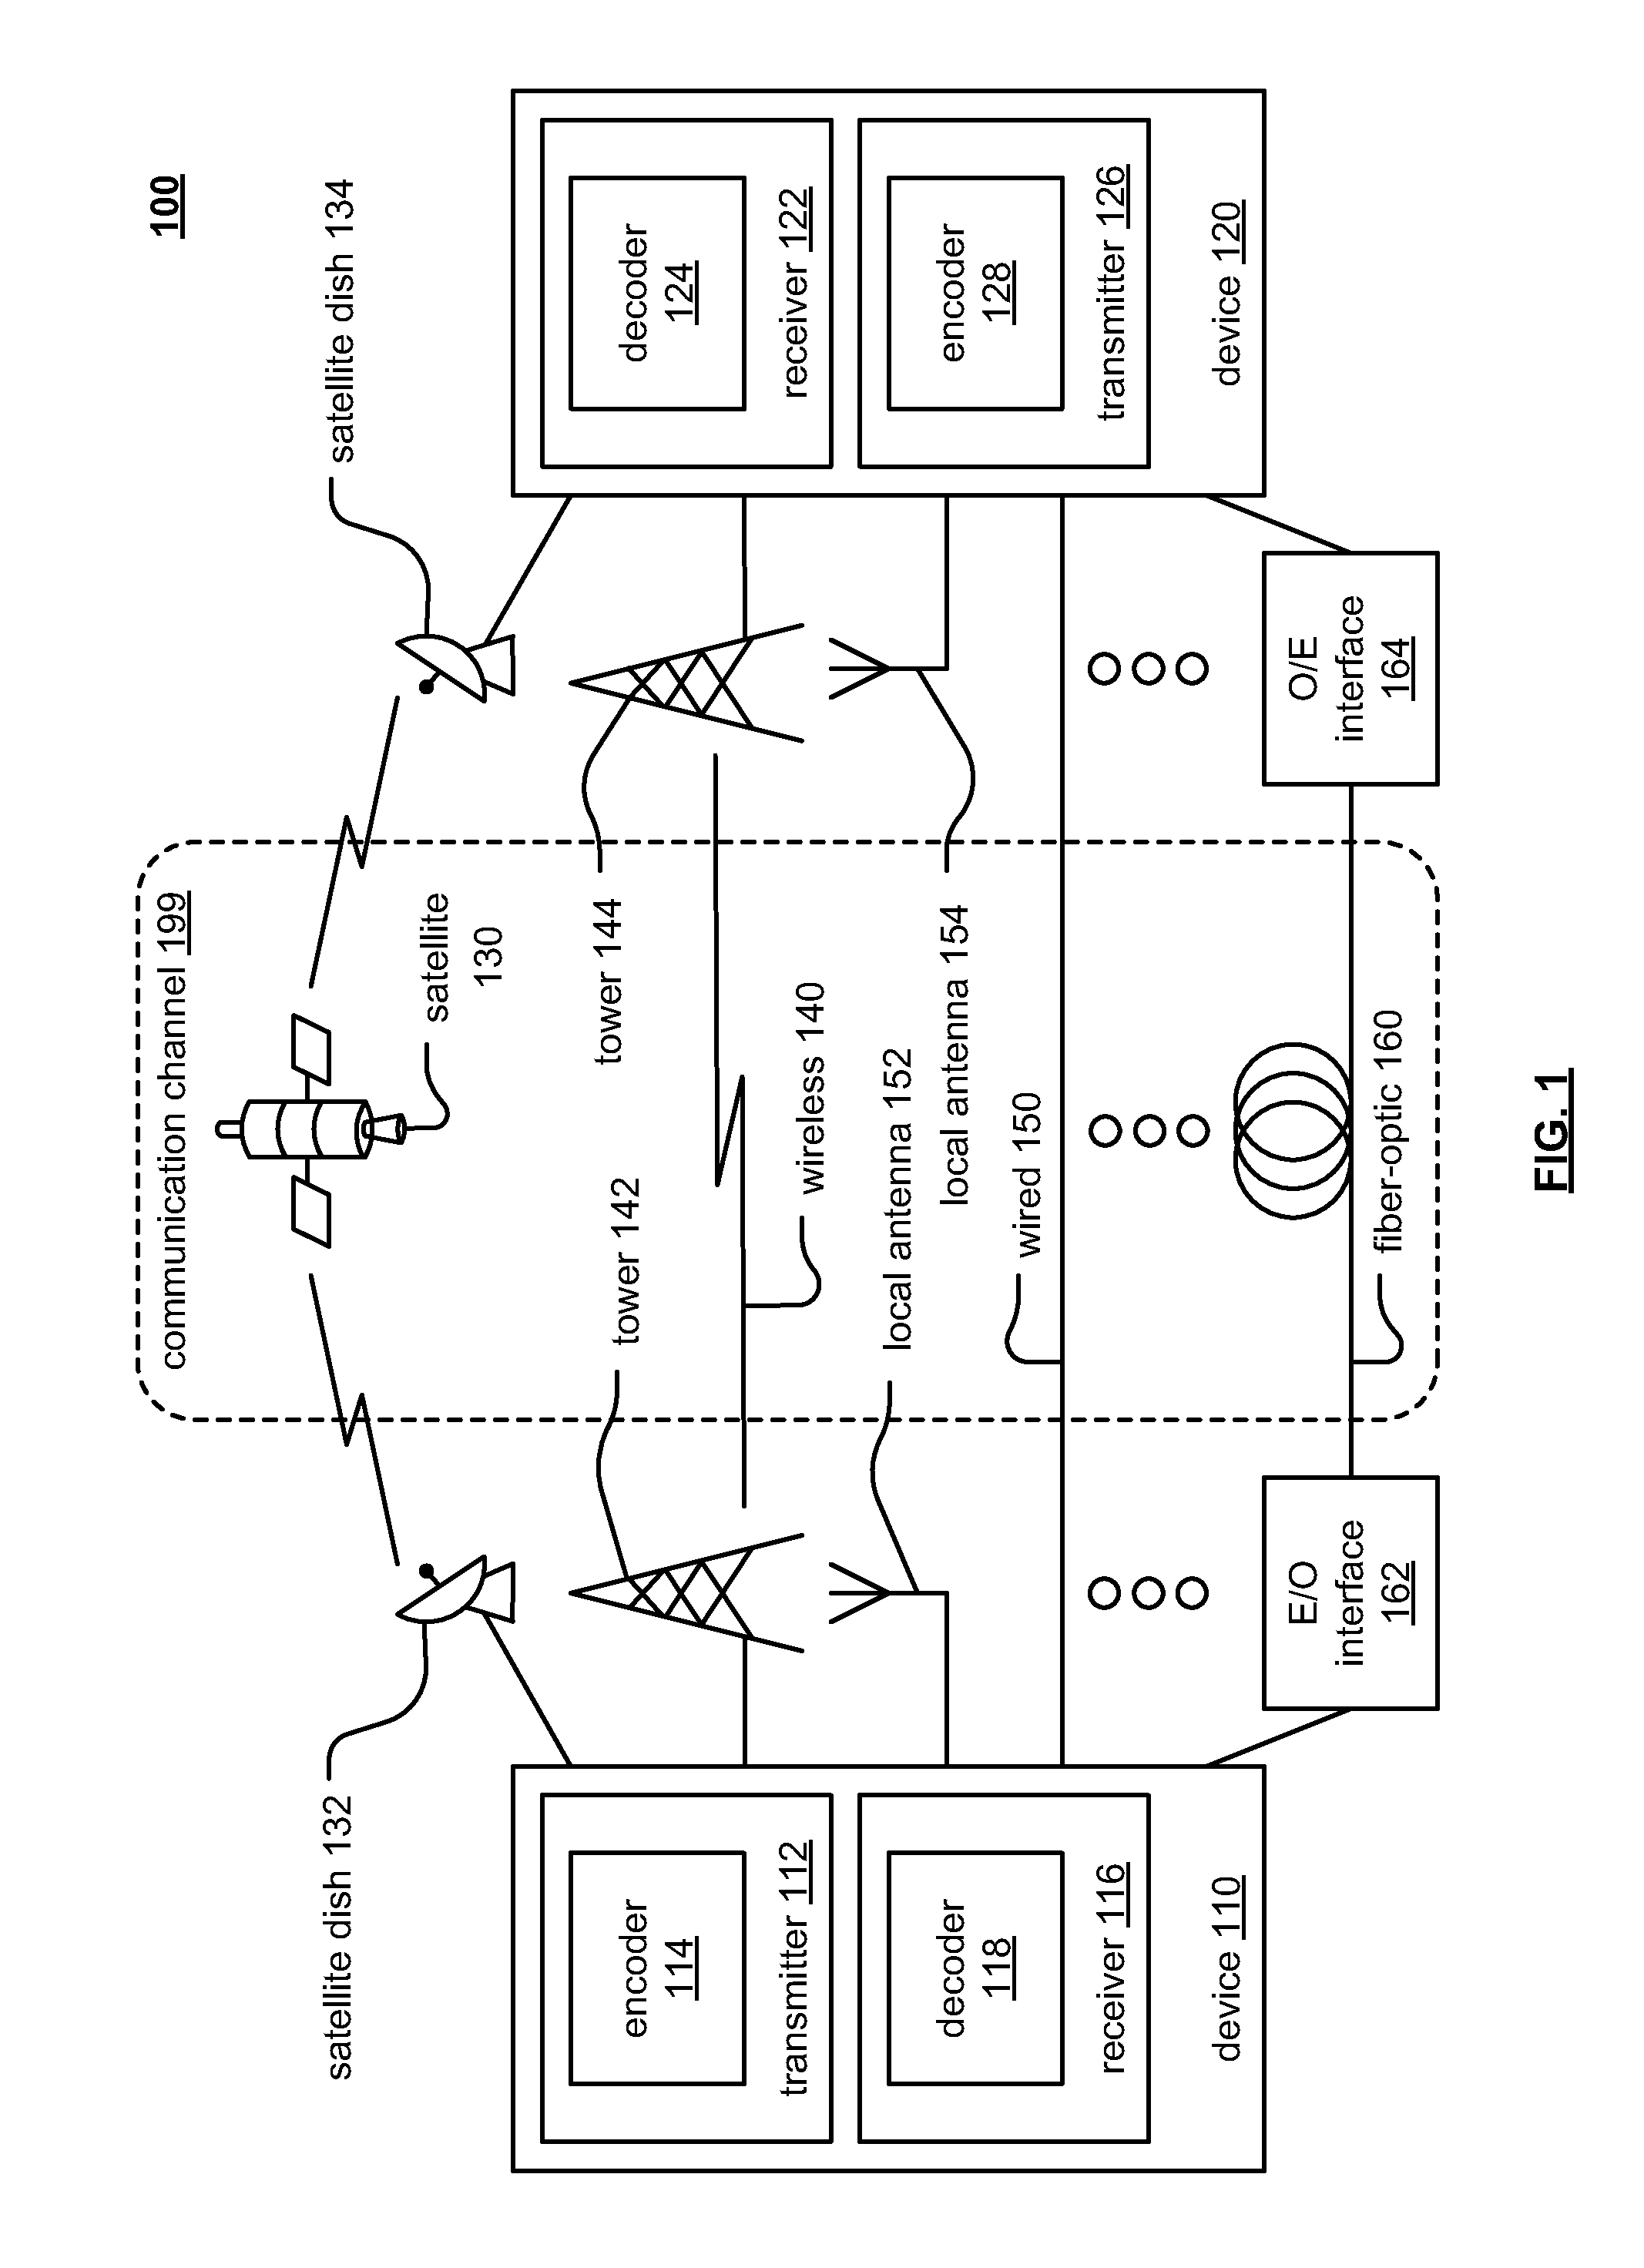 Adaptive loop filtering in accordance with video coding